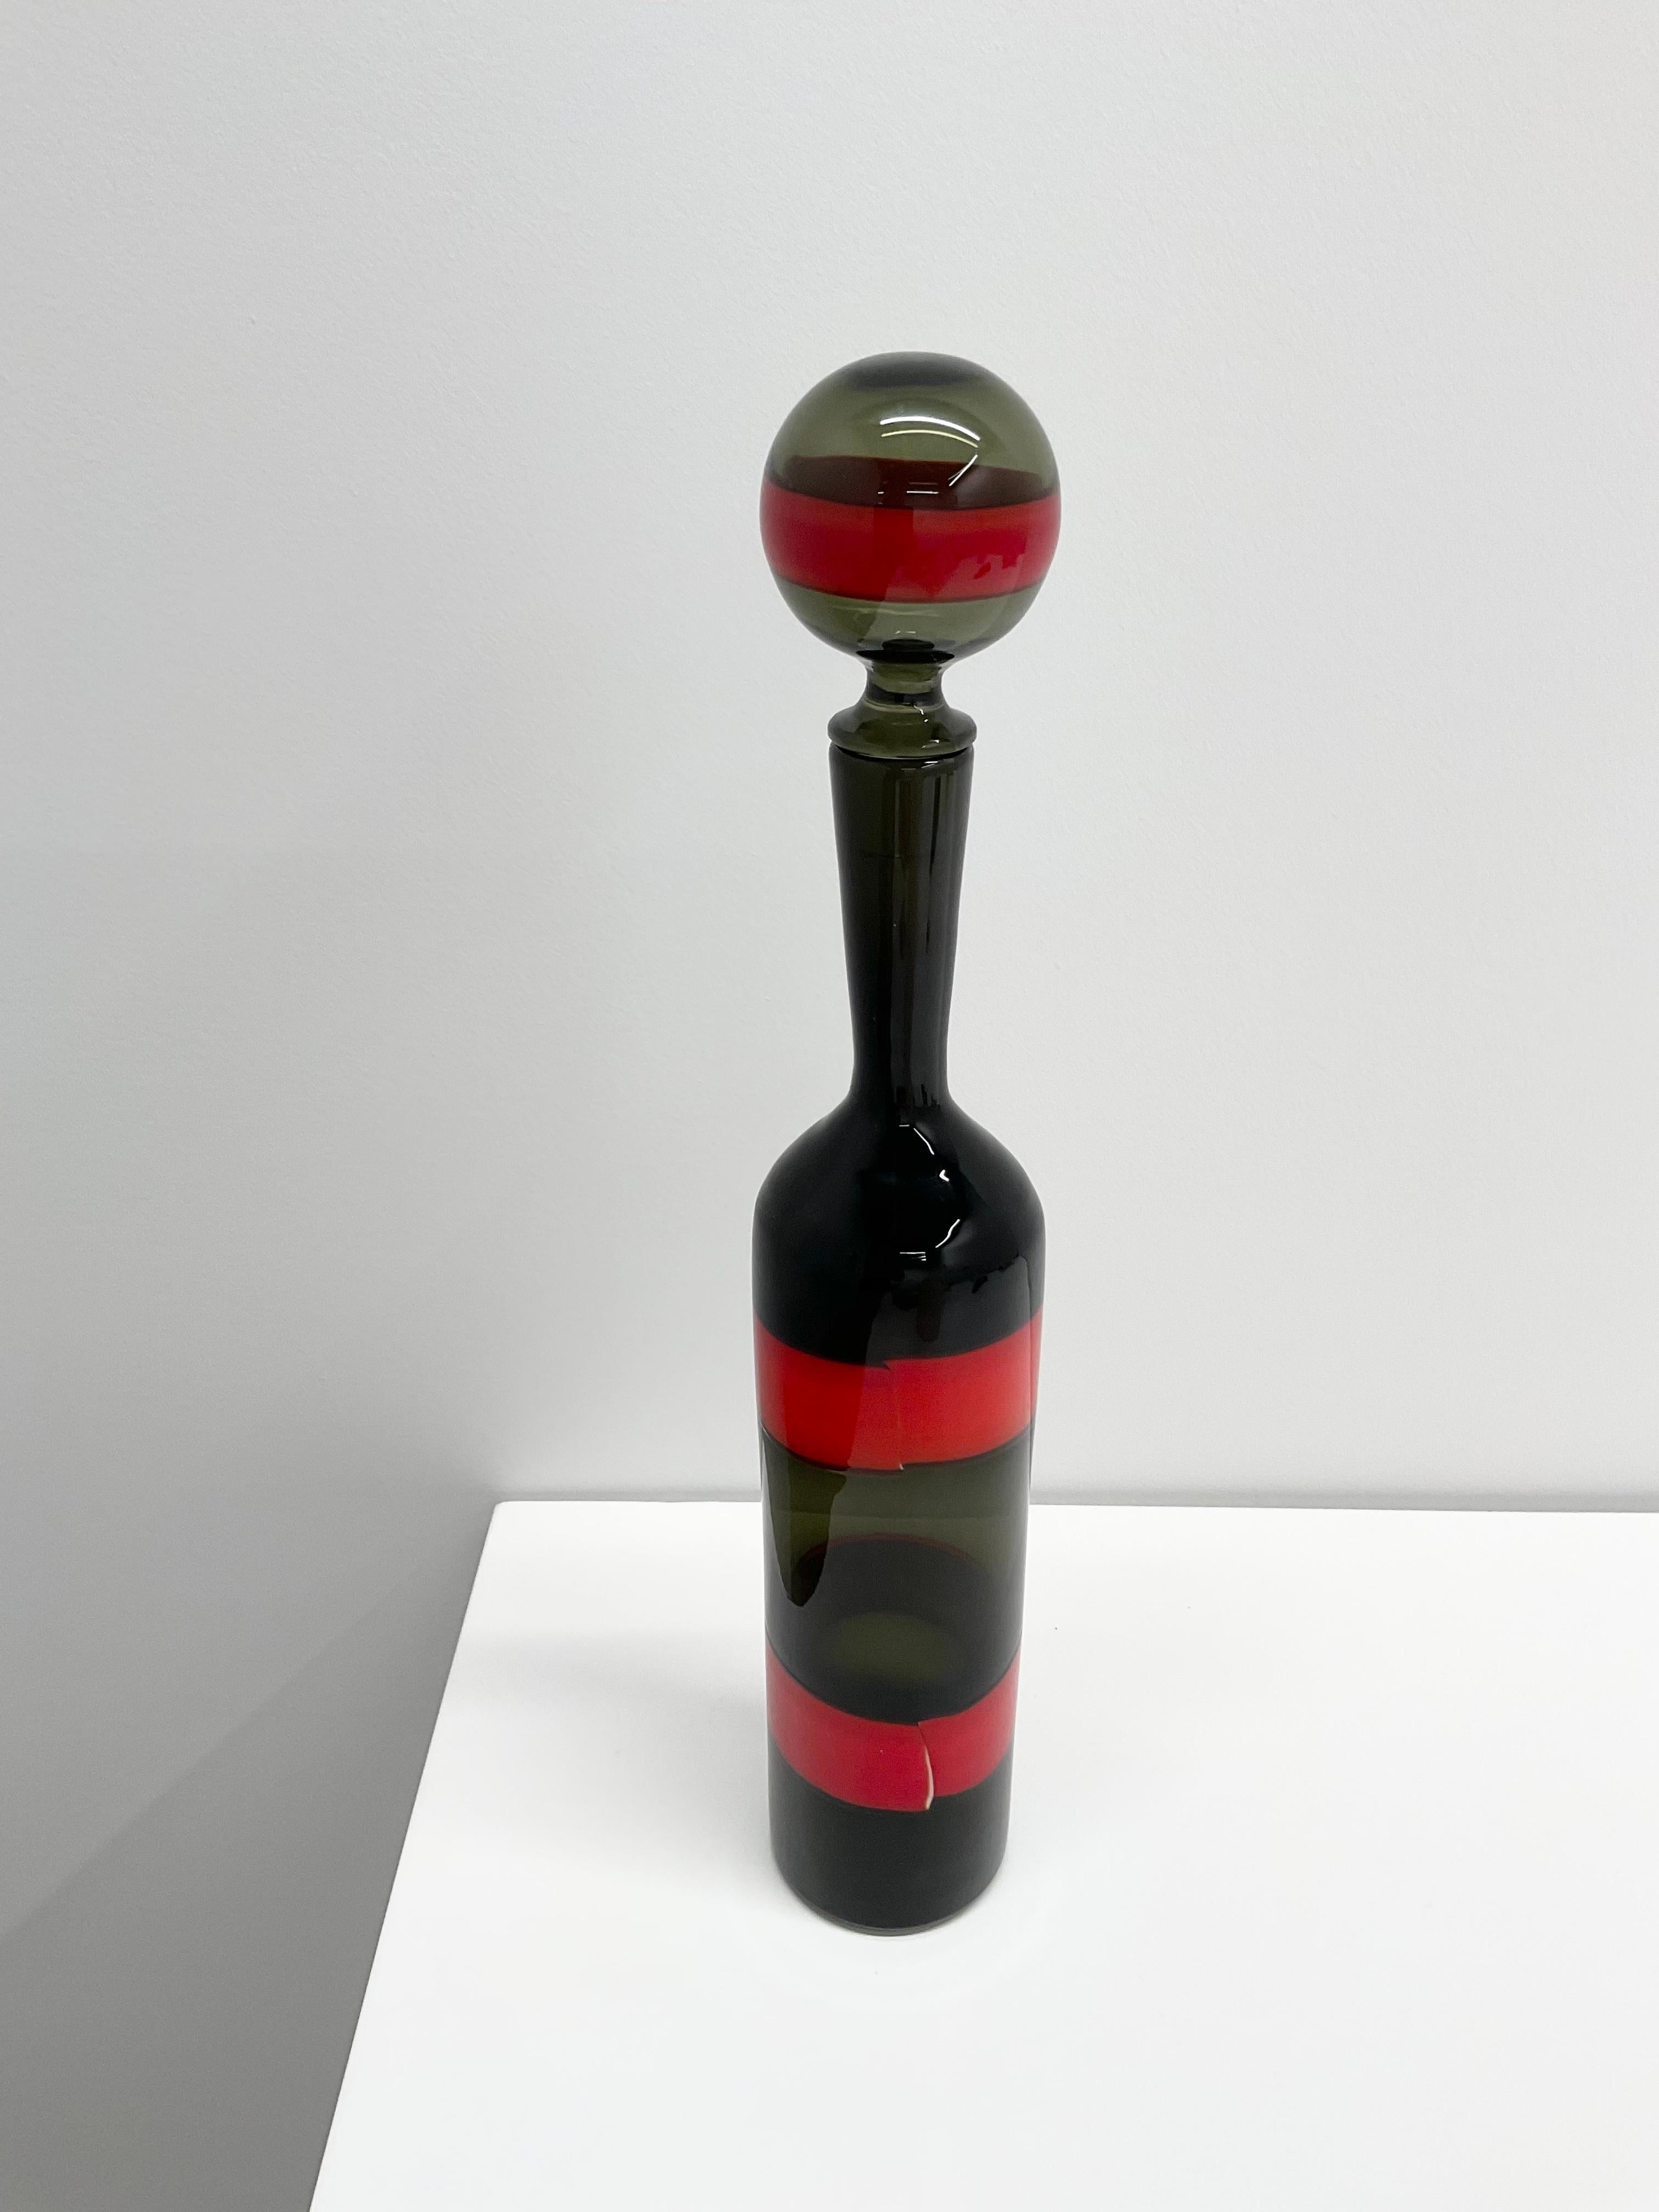 Fulvio Bianconi A Fasce “Orizzontali” stoppered bottle for Venini, Italy, 1960s

Additional Information:
Materials: Polychrome banded glass
Dimensions: 18 3/4” H x 3 1/2” Dia.
Condition: Excellent.